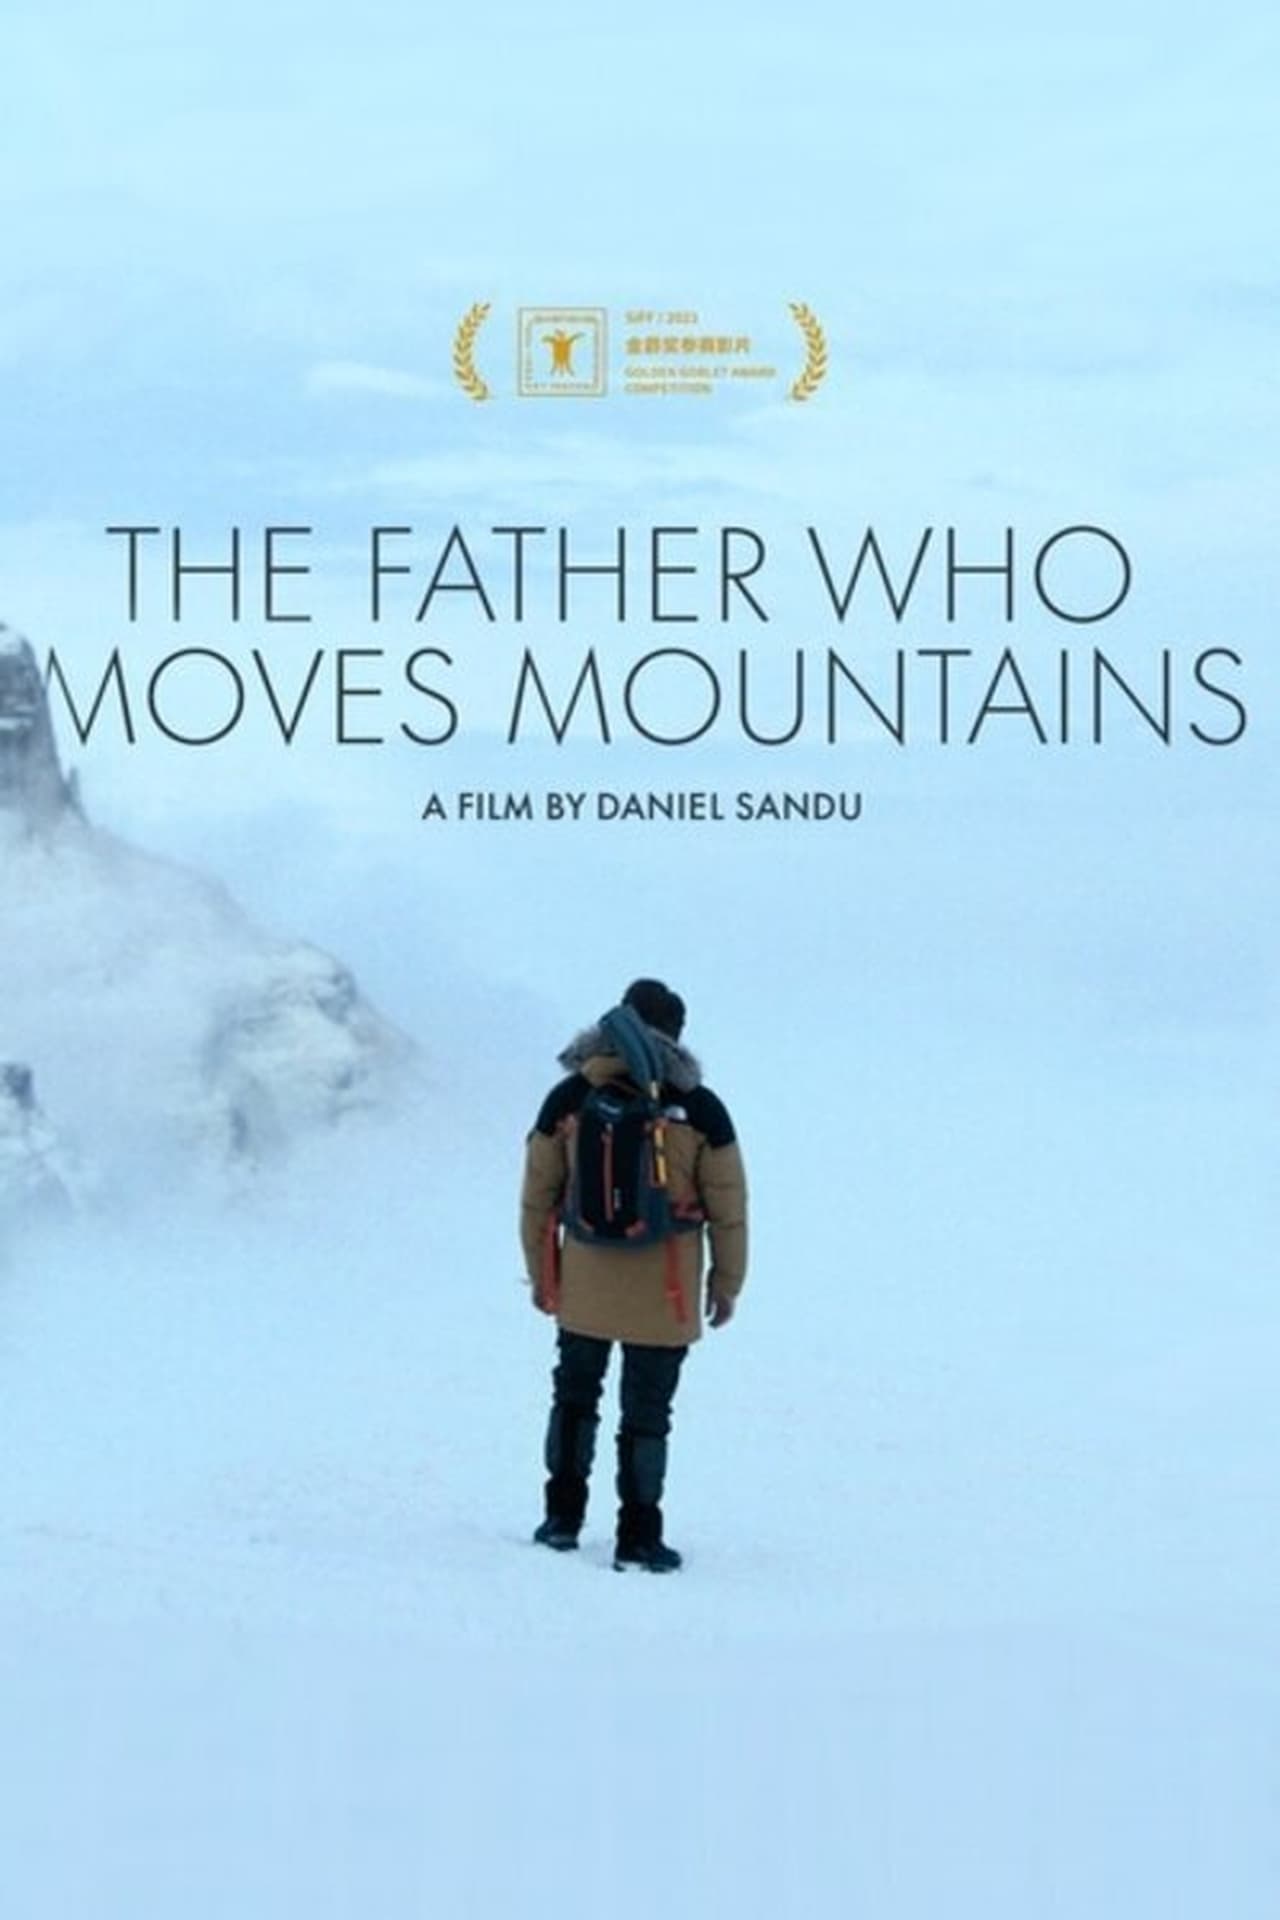 The Father Who Moves Mountains (2021) 640Kbps 24Fps 48Khz 5.1Ch DD+ NF E-AC3 Turkish Audio TAC